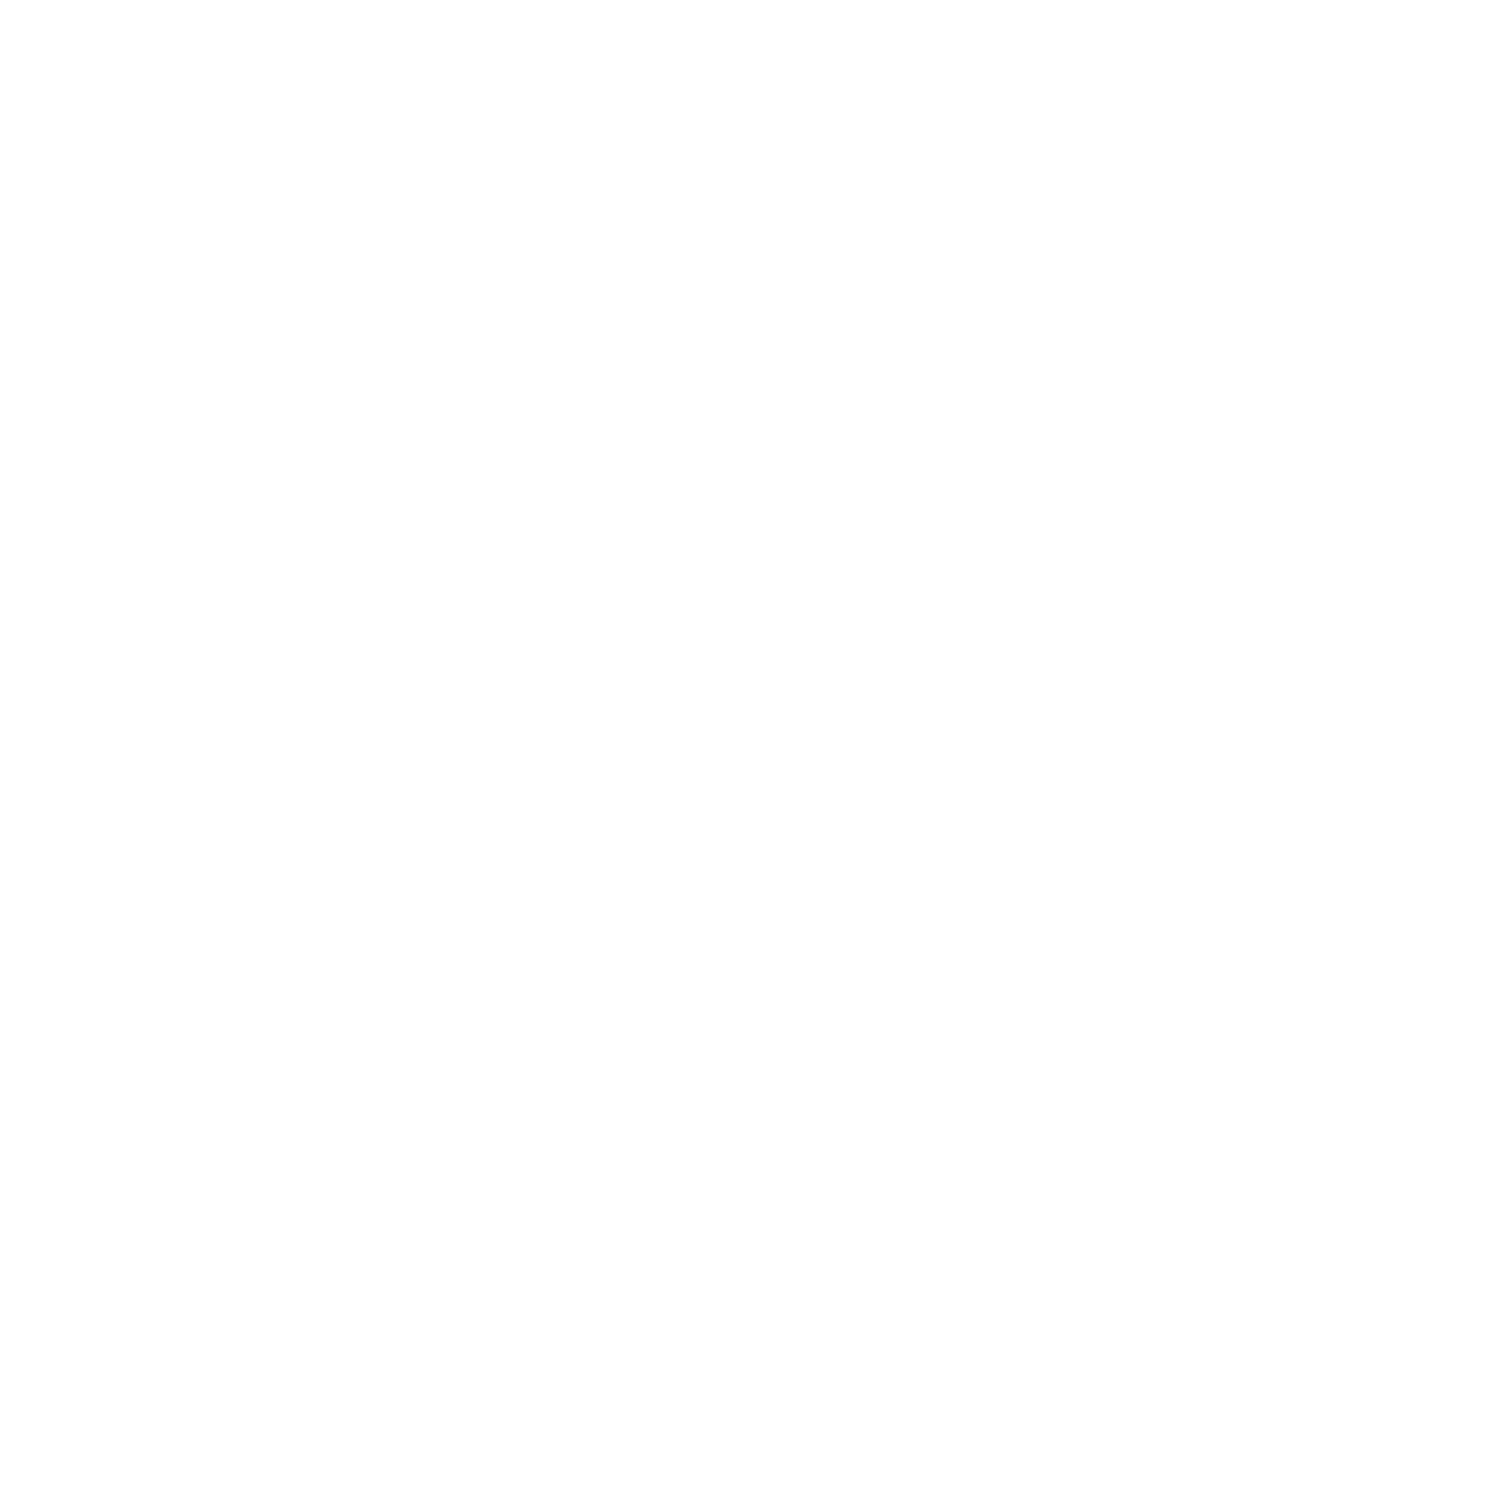 Daryl Hopkins Post Production     I     Post Production services for TV & Online